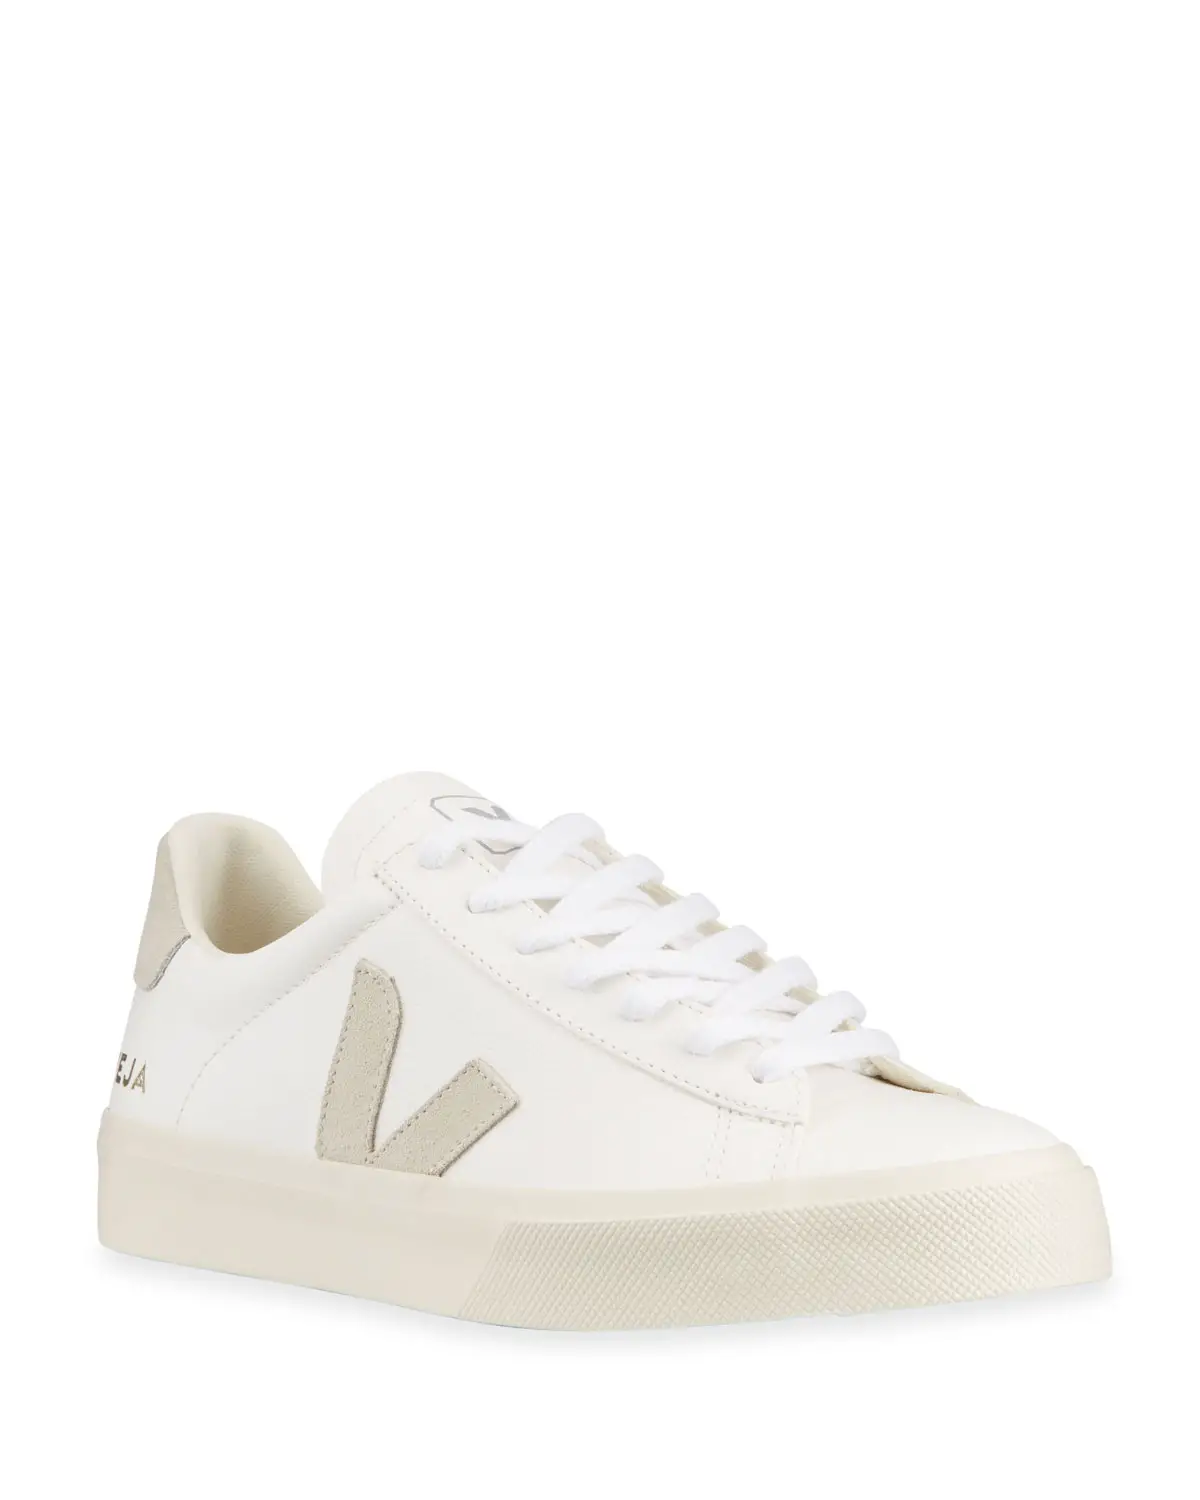 VEJA Campo Bicolor Leather Low